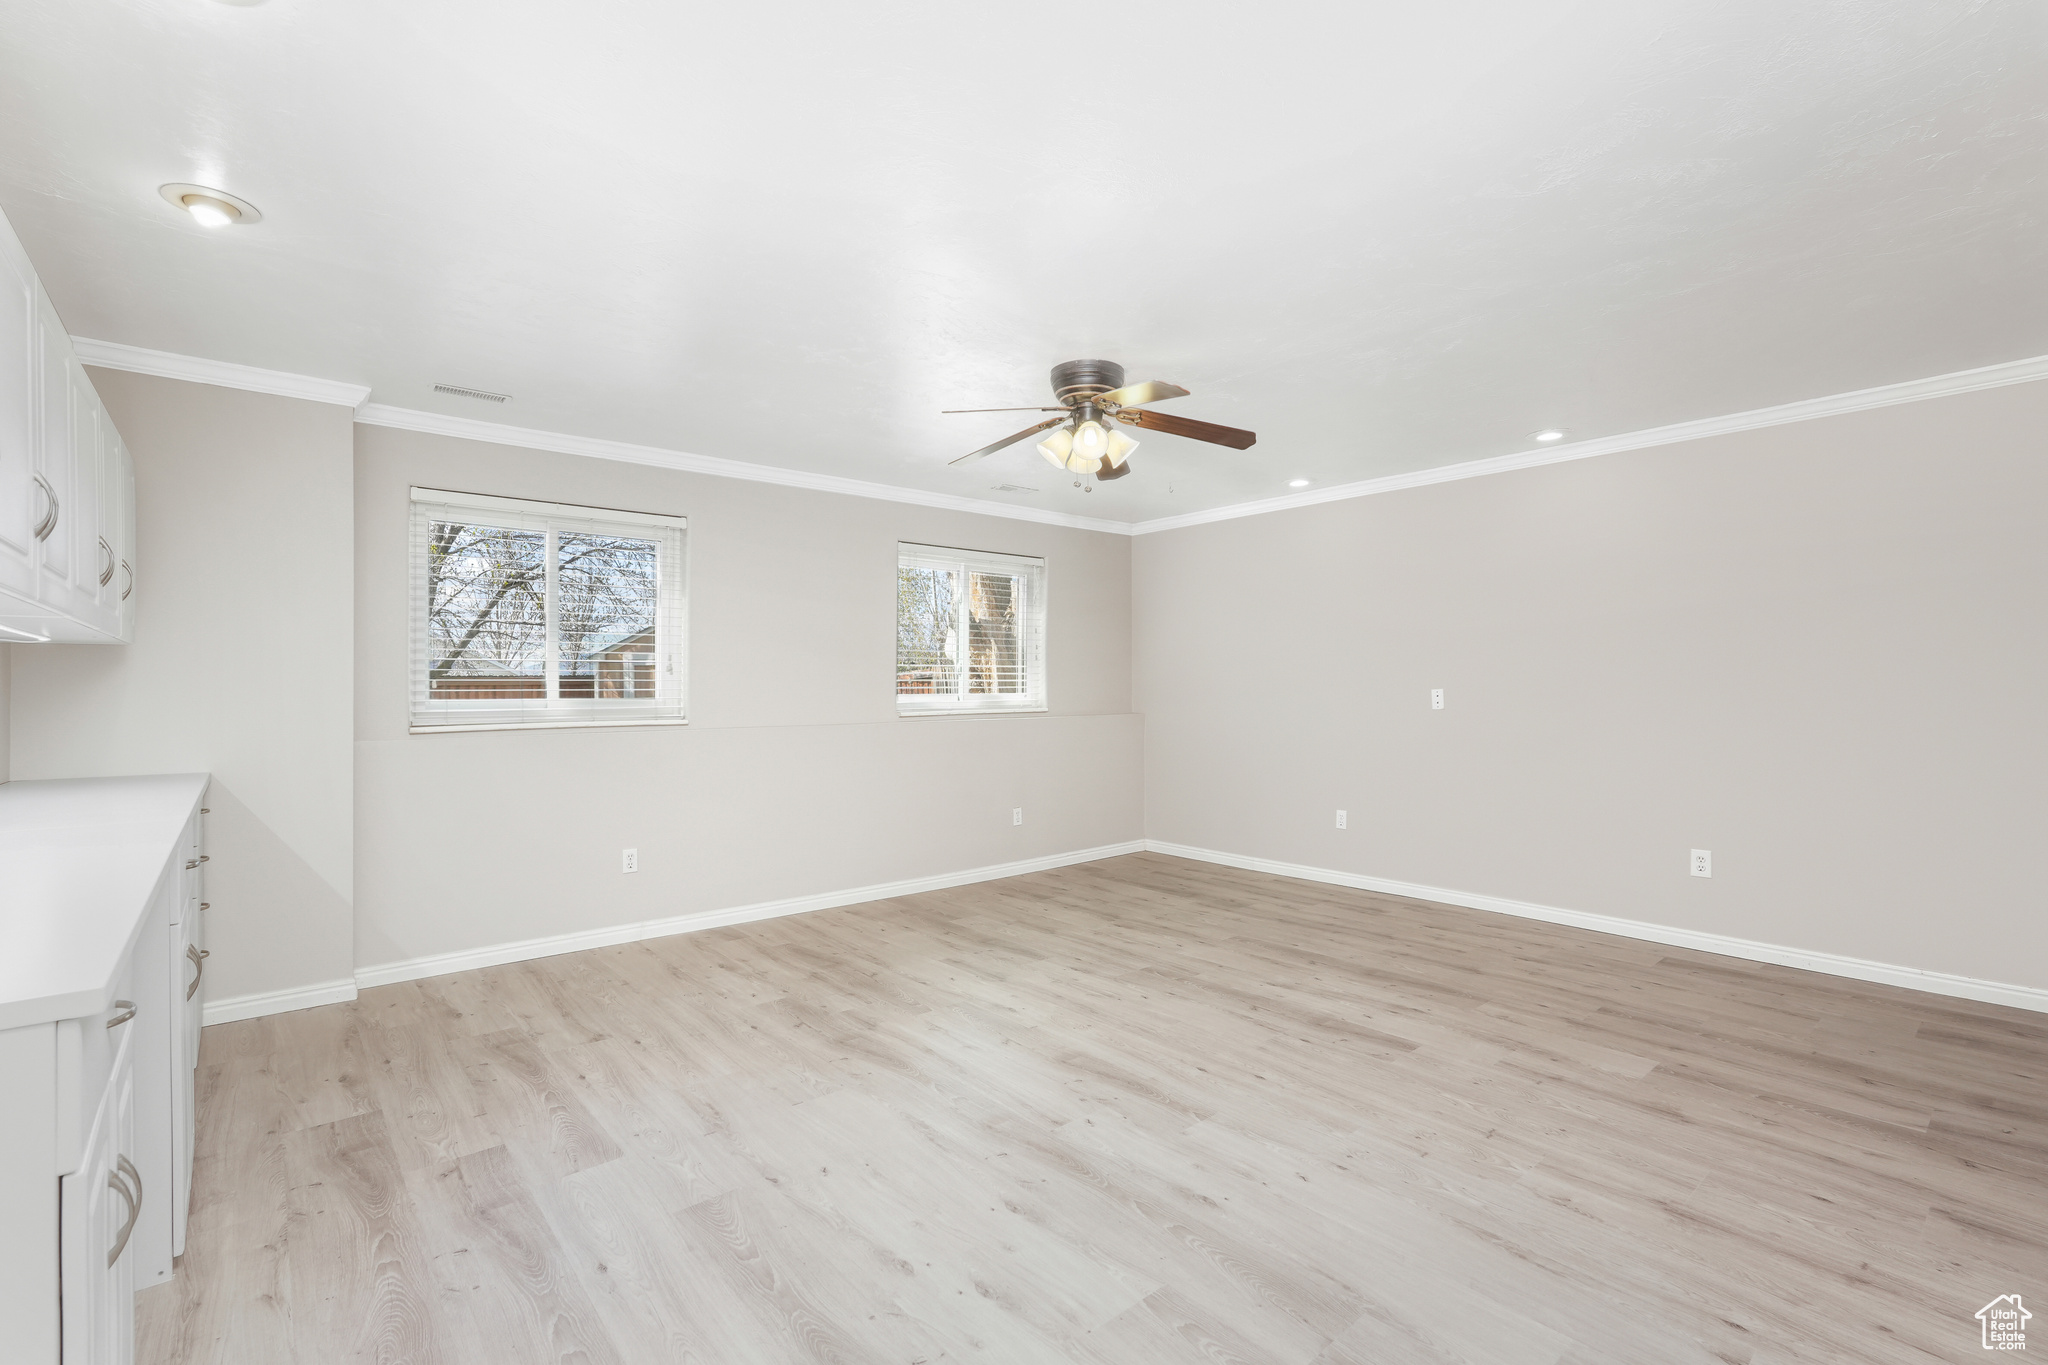 Unfurnished room featuring ornamental molding, ceiling fan, and light wood-type flooring